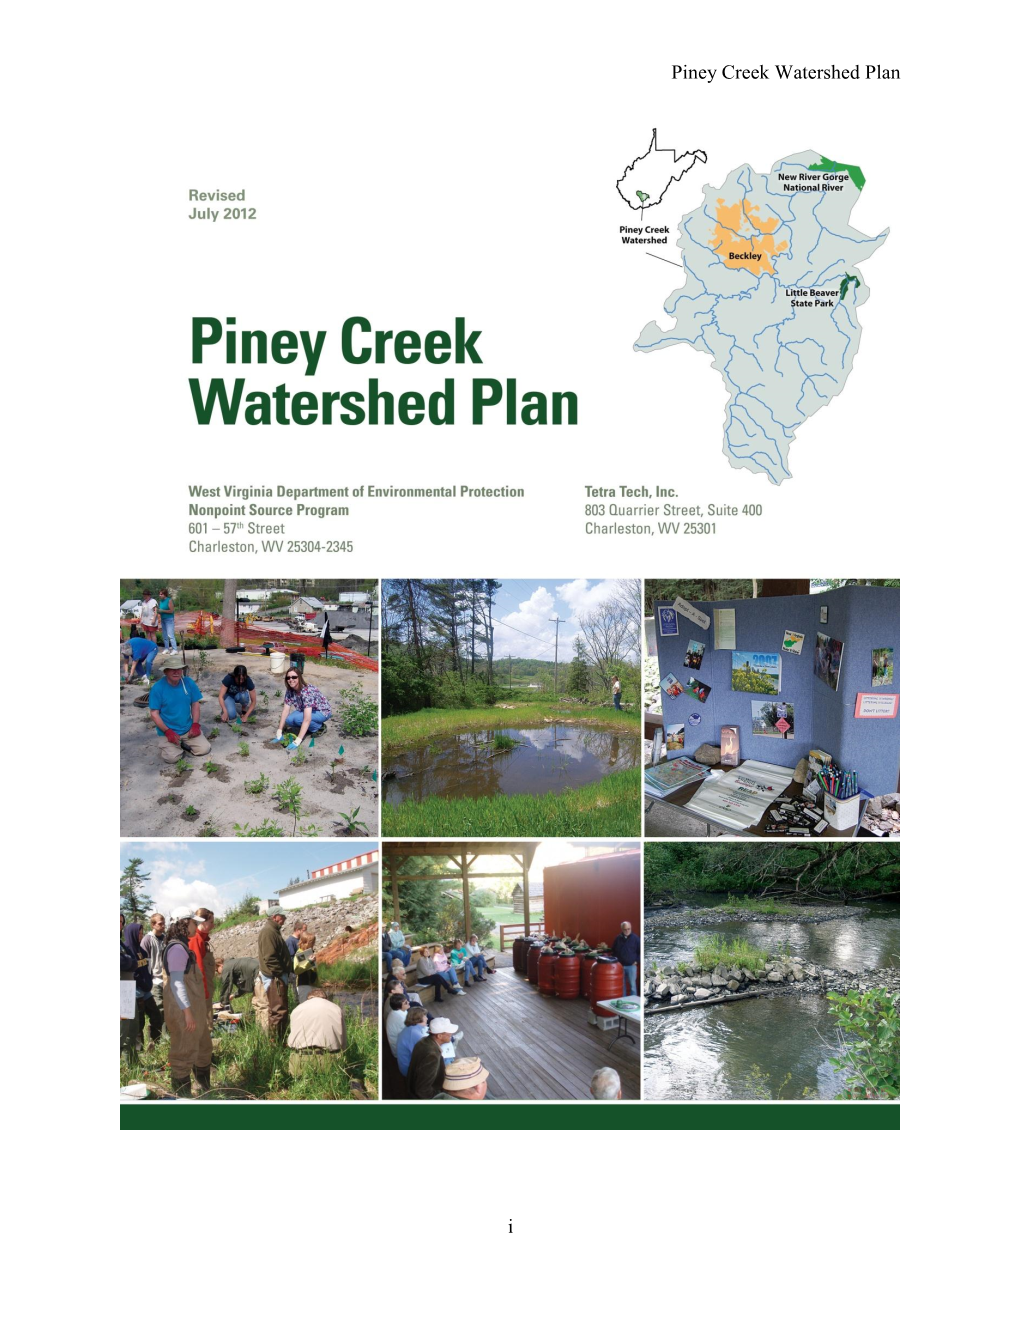 Piney Creek Watershed Plan Included in the Permitting Requirements in Phase II Stormwater Rules